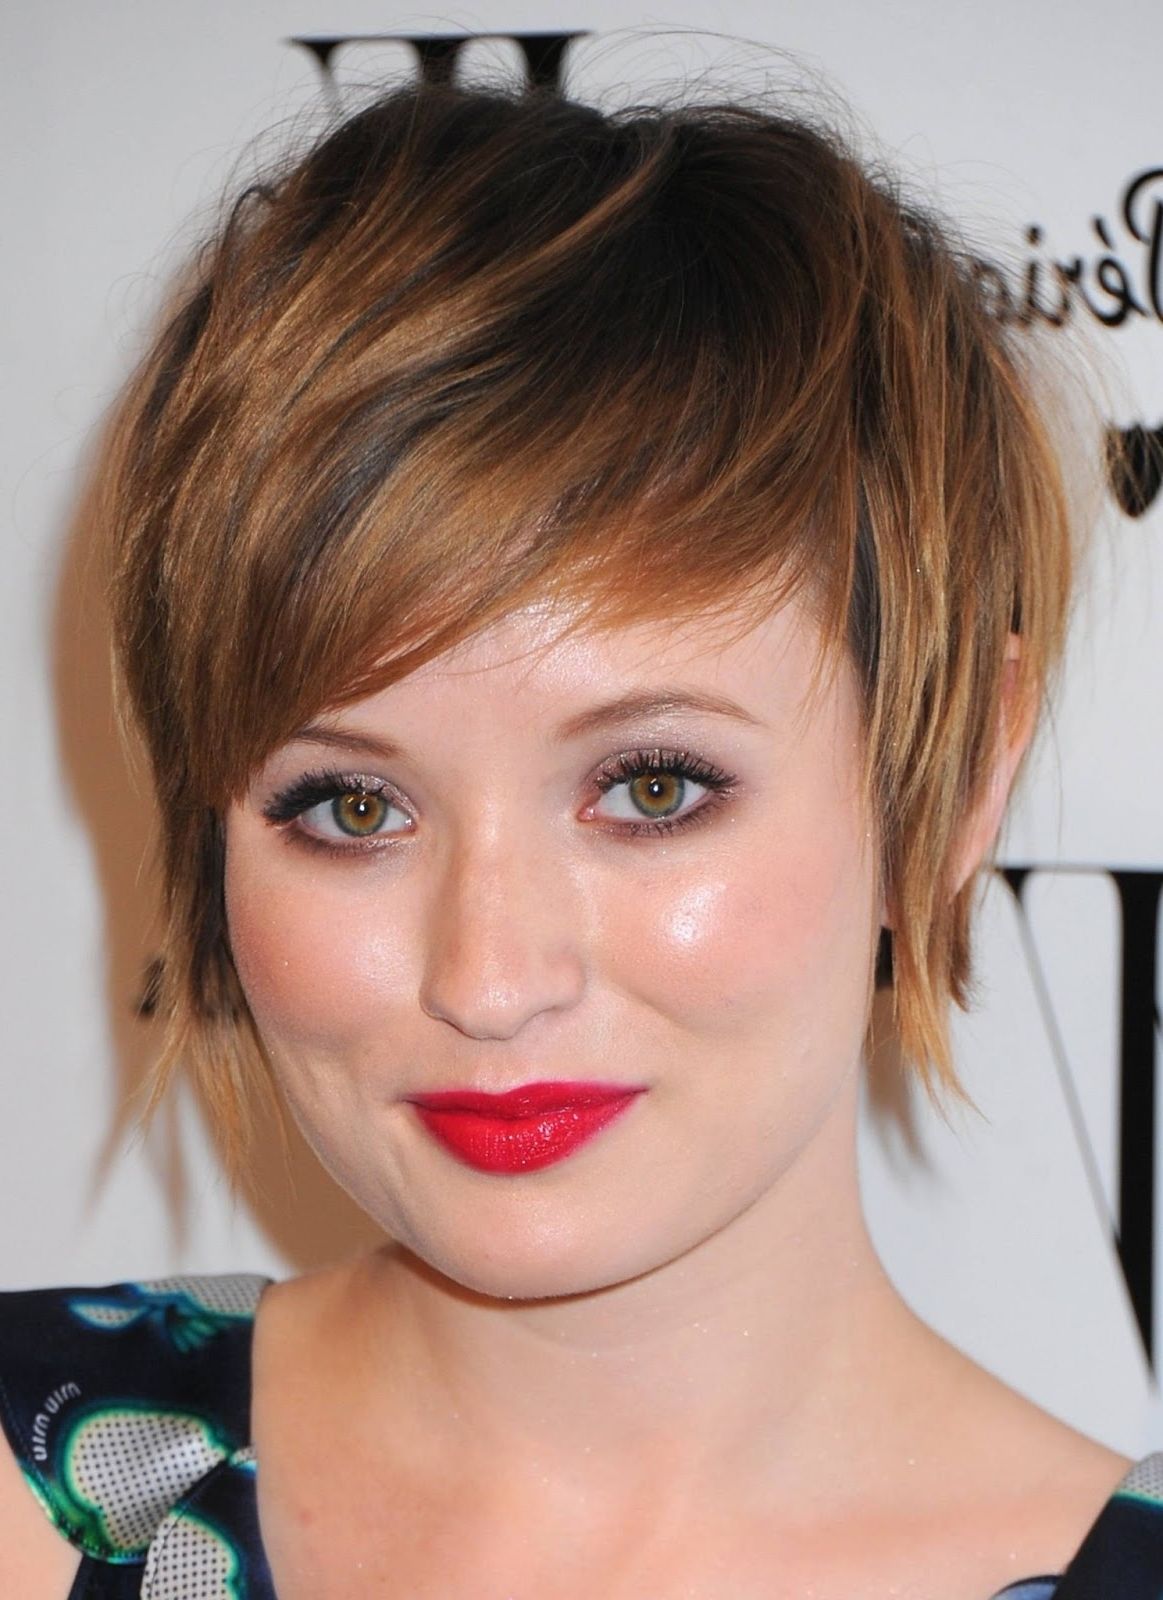 Pixie Haircuts : Awesome Trendy Short Hairstyles For Thin Hair Pertaining To Recent Pixie Hairstyles Styles For Thin Hair (View 13 of 15)